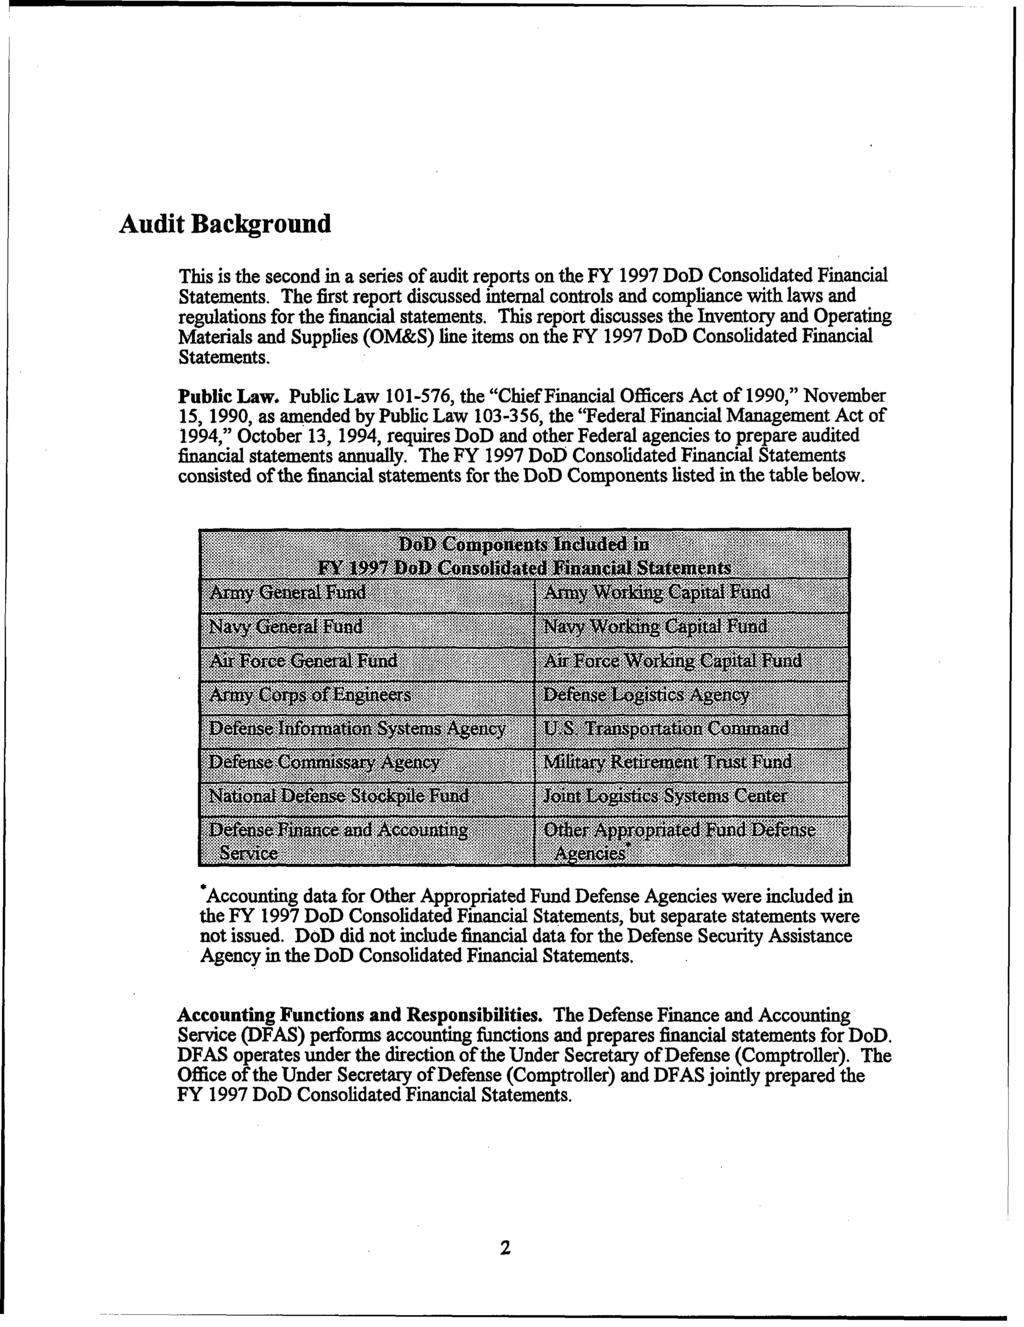 Audit Background This is the second in a series of audit reports on the FY 1997 DoD Consolidated Financial Statements.